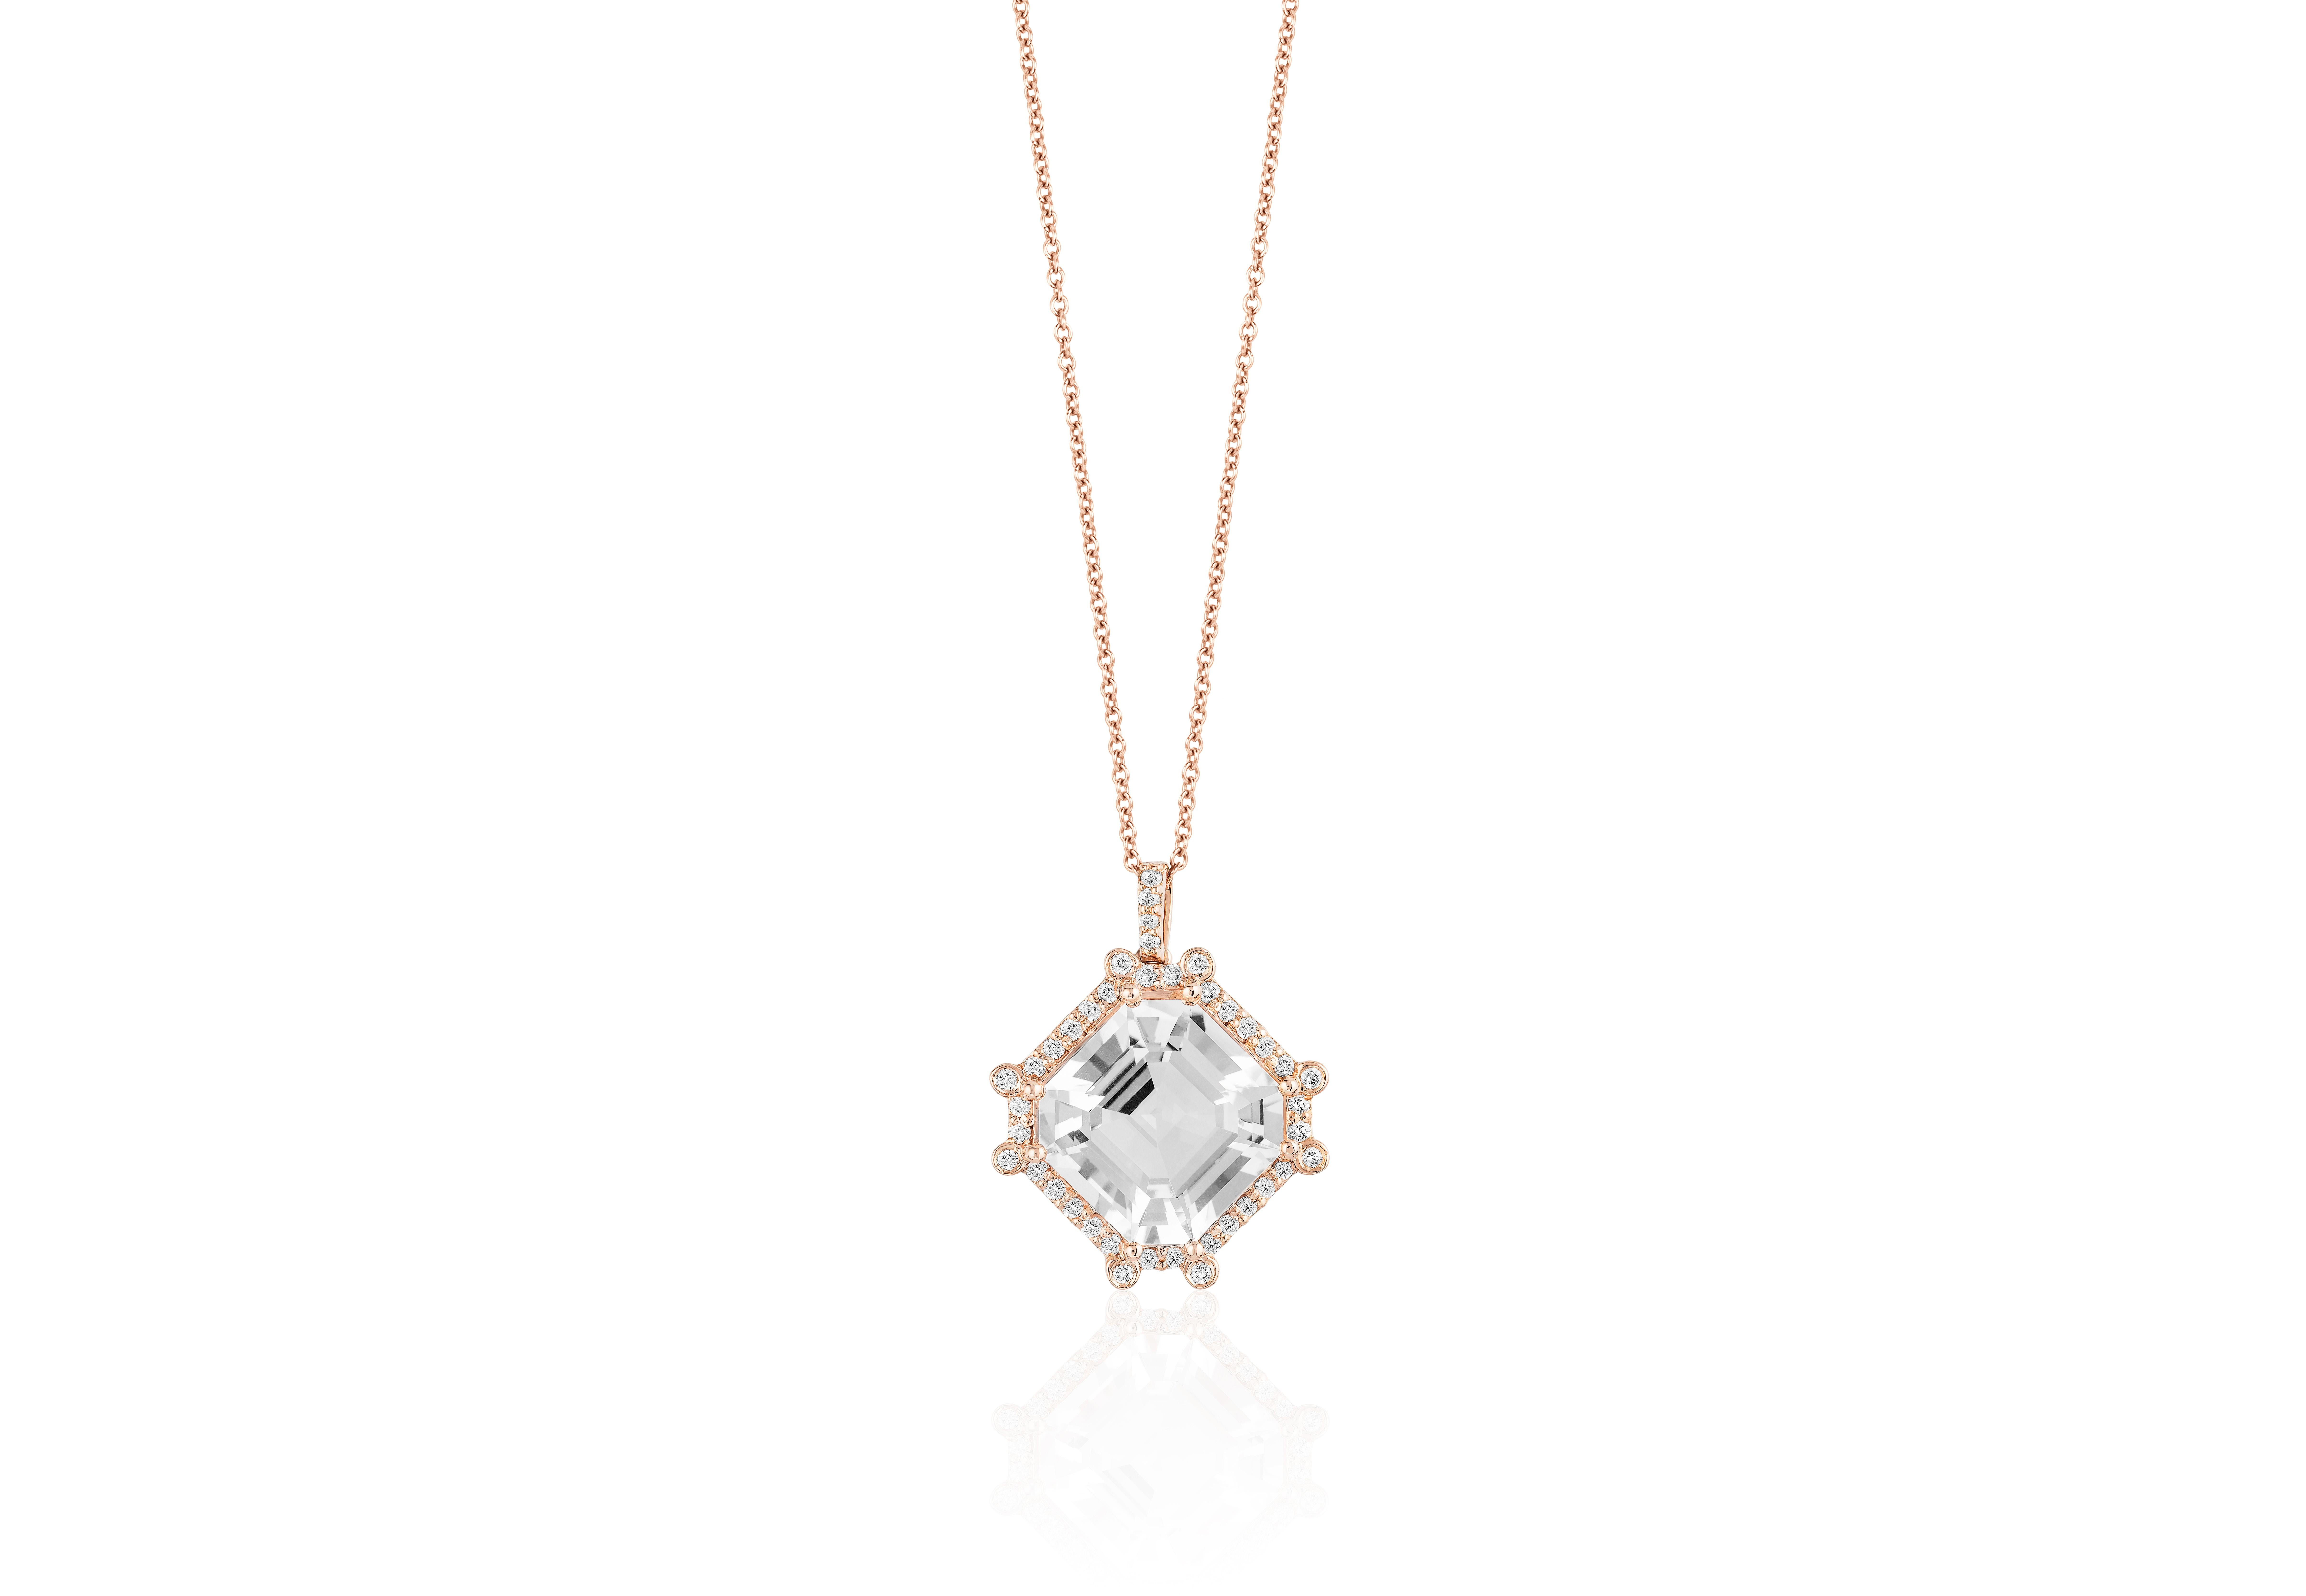 Rock Crystal & Diamond Octagon Pendant in 18K Rose Gold on an 18'' Chain from 'Gossip' Collection

 Stone Size: 12 x 12 mm 

Gemstone Approx. Wt. Rock Crystal 6.81 Carats

 Diamonds: G-H / VS, Approx Wt: 0.30 Carats